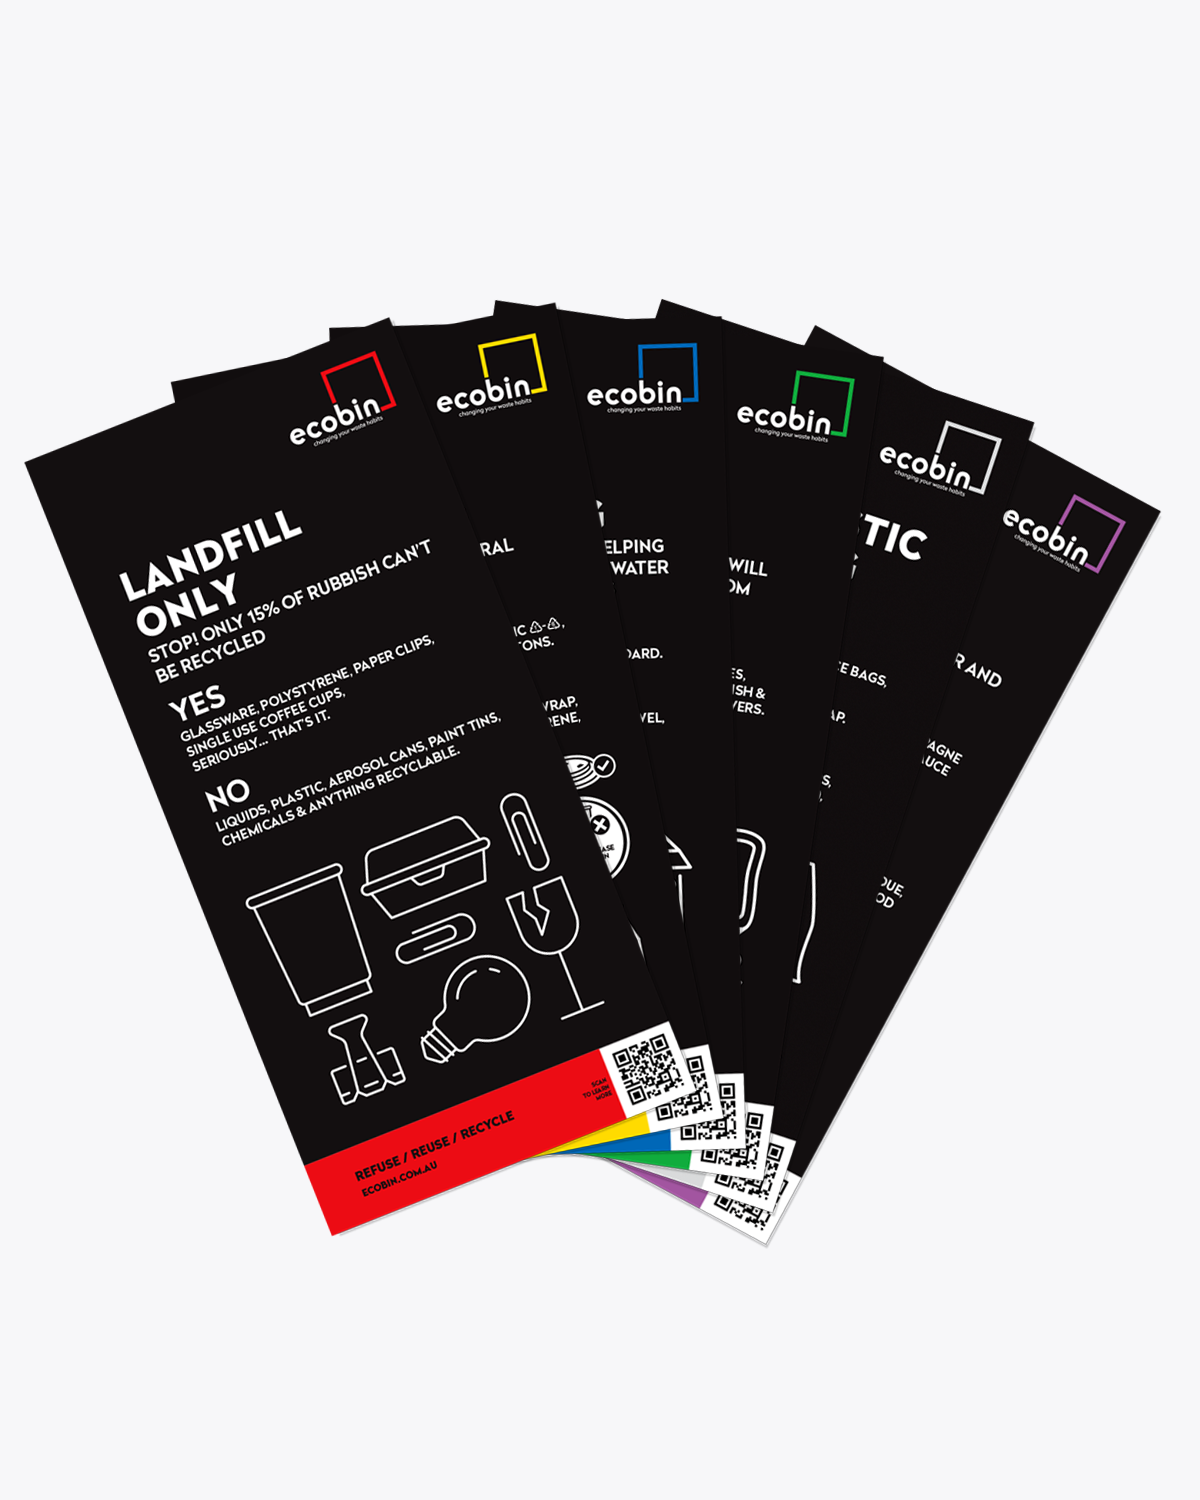 Set of 6 Educational Posters | Image Design